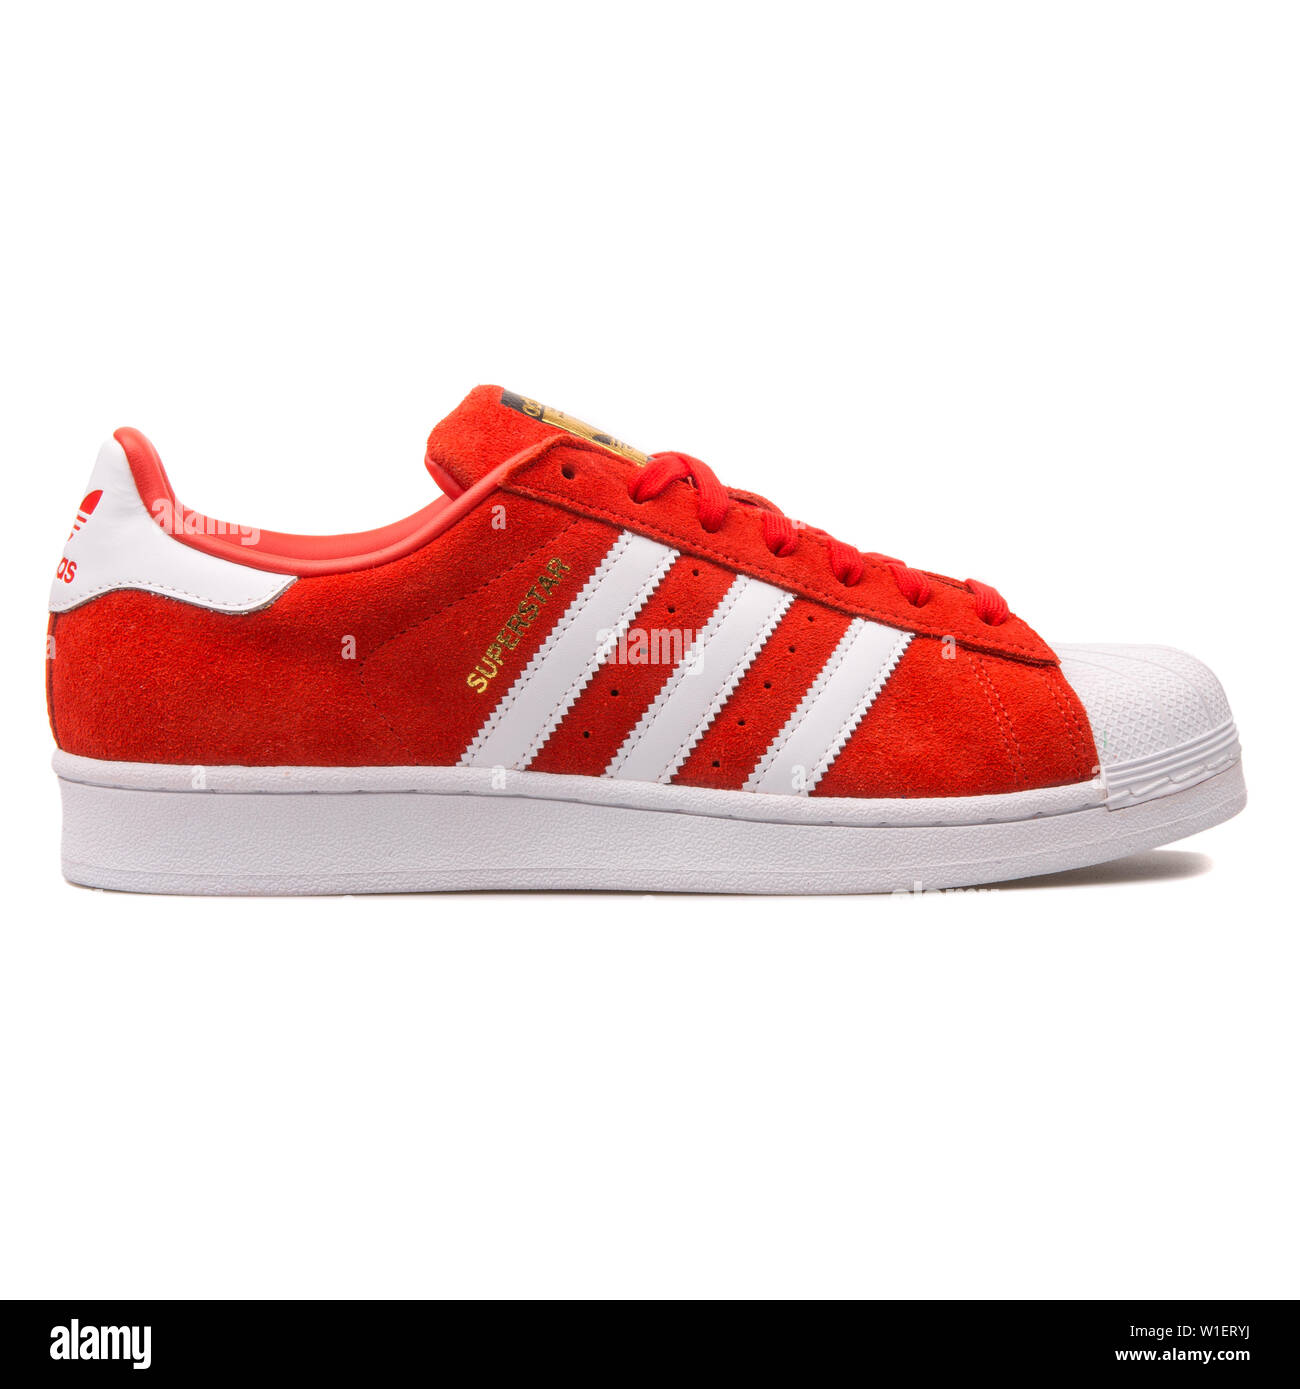 VIENNA, AUSTRIA - AUGUST 10, 2017: Adidas Superstar Suede red and white  sneaker on white background Stock Photo - Alamy